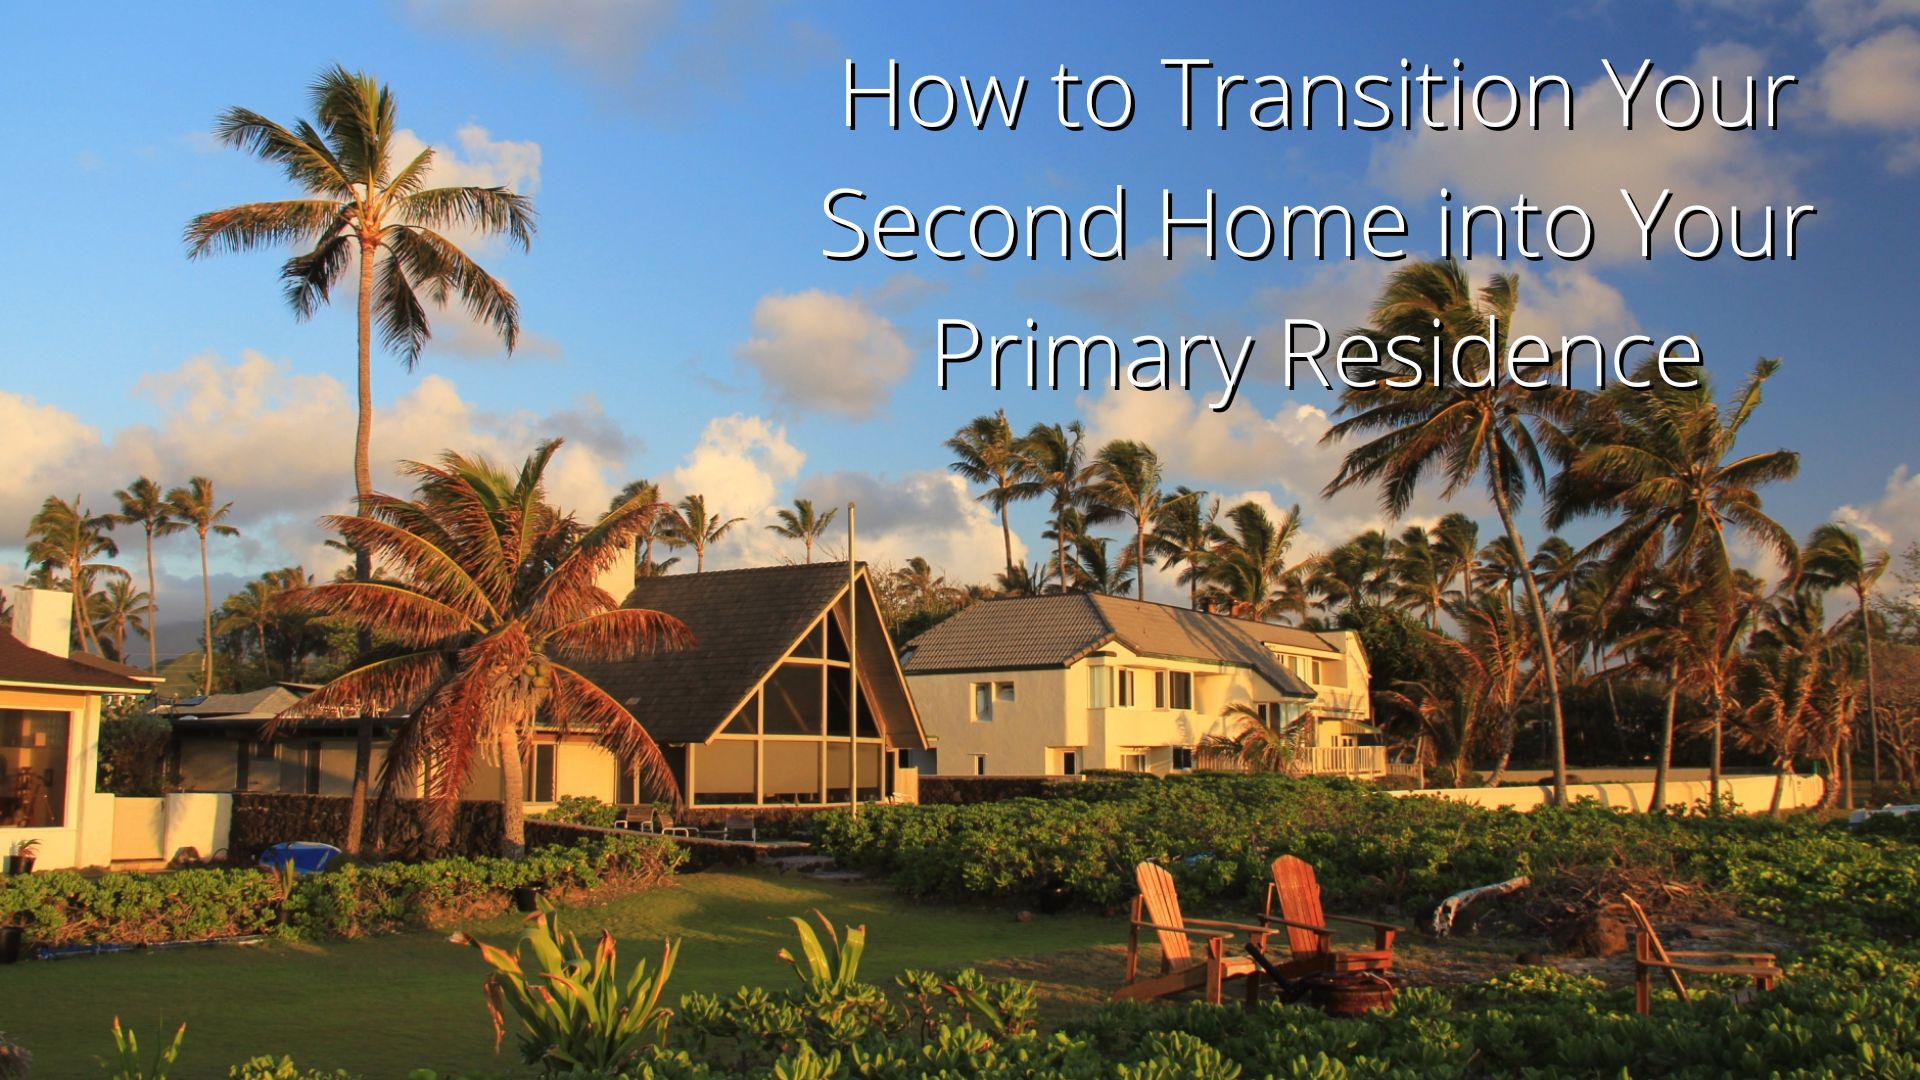 How to Transition Your Second Home into Your Primary Residence